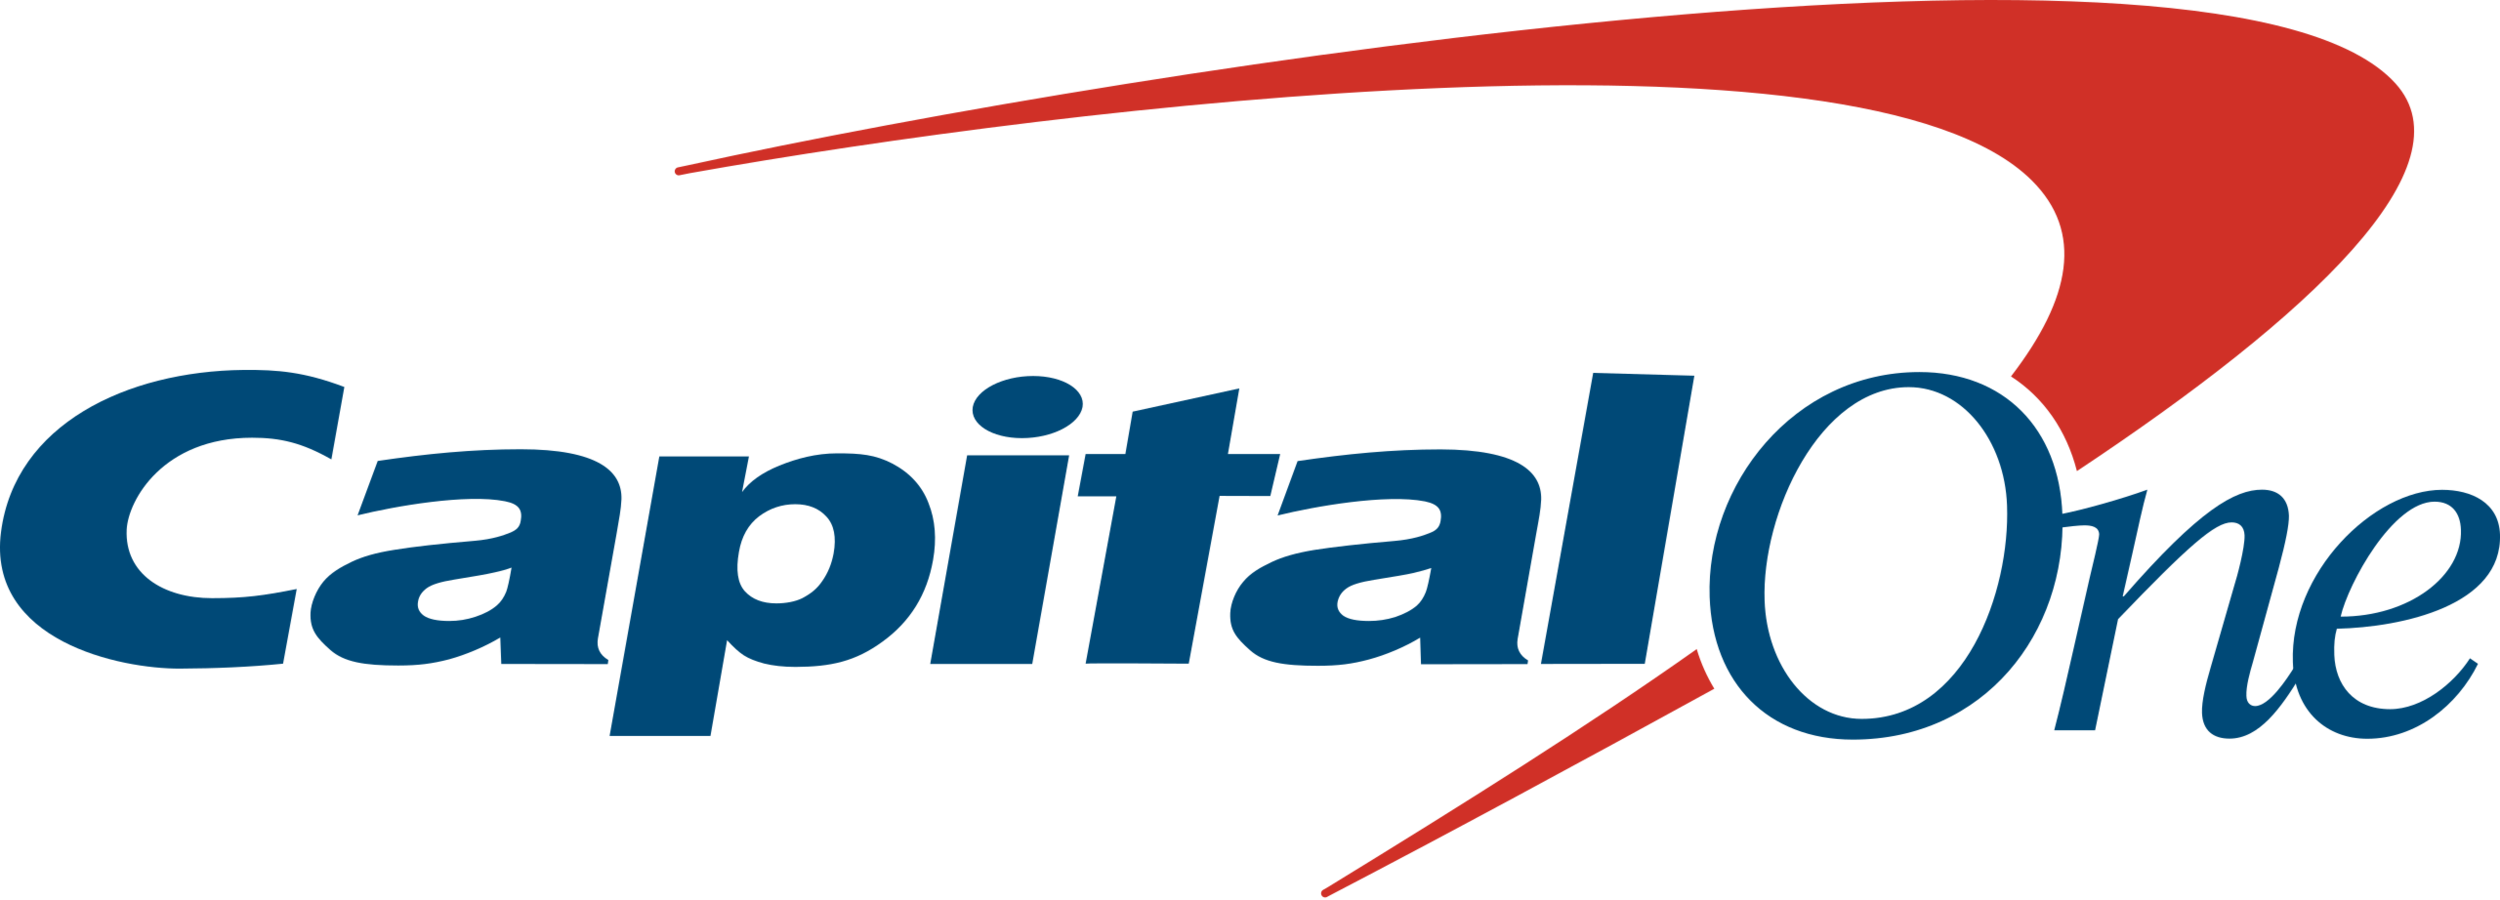 2560px-Capital_One_logo.svg.png